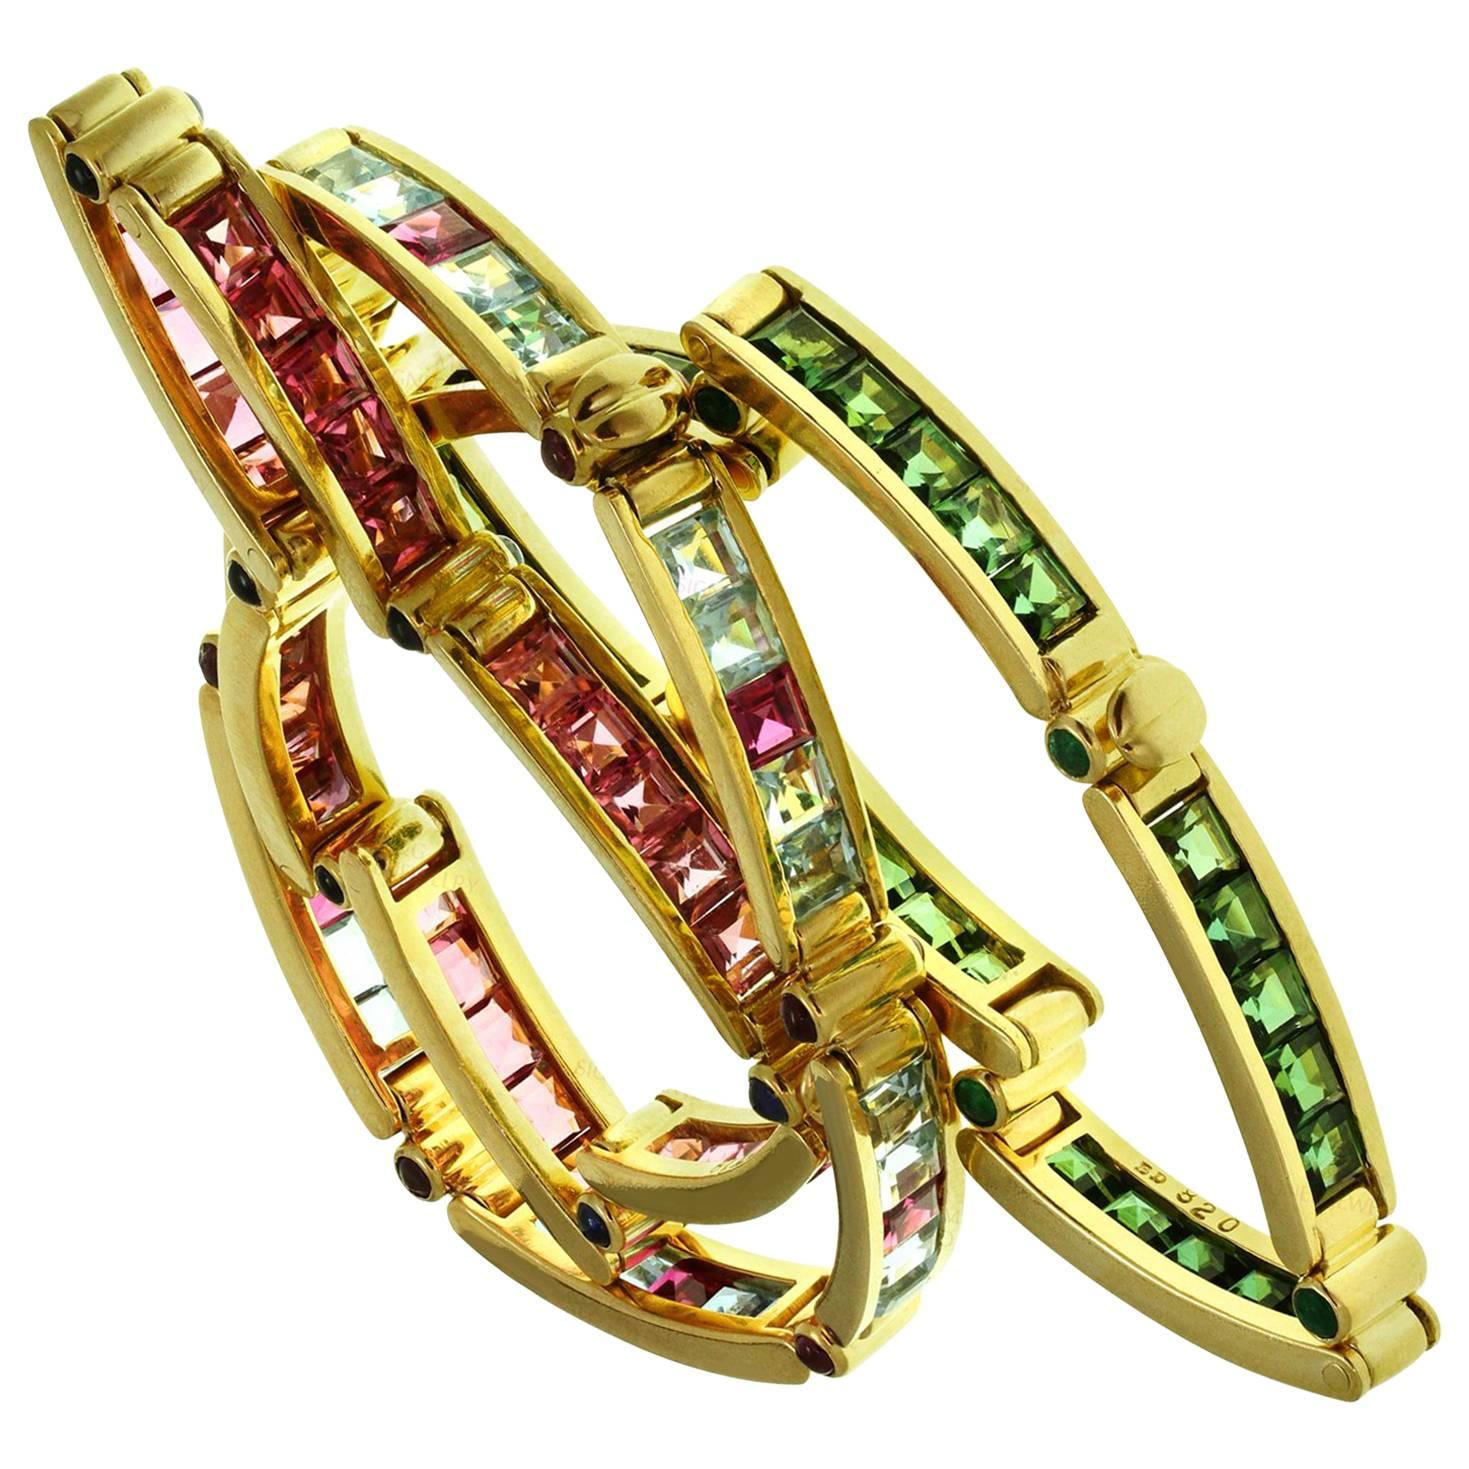 This rare and fabulous trio of Bulgari bracelets is crafted in 18k yellow gold and set with a colorful array of square-cut gemstones - pink and green tourmalines weigh an estimated 15.00 carats, aquamarines weigh an estimated 4.80 carats, and rubies